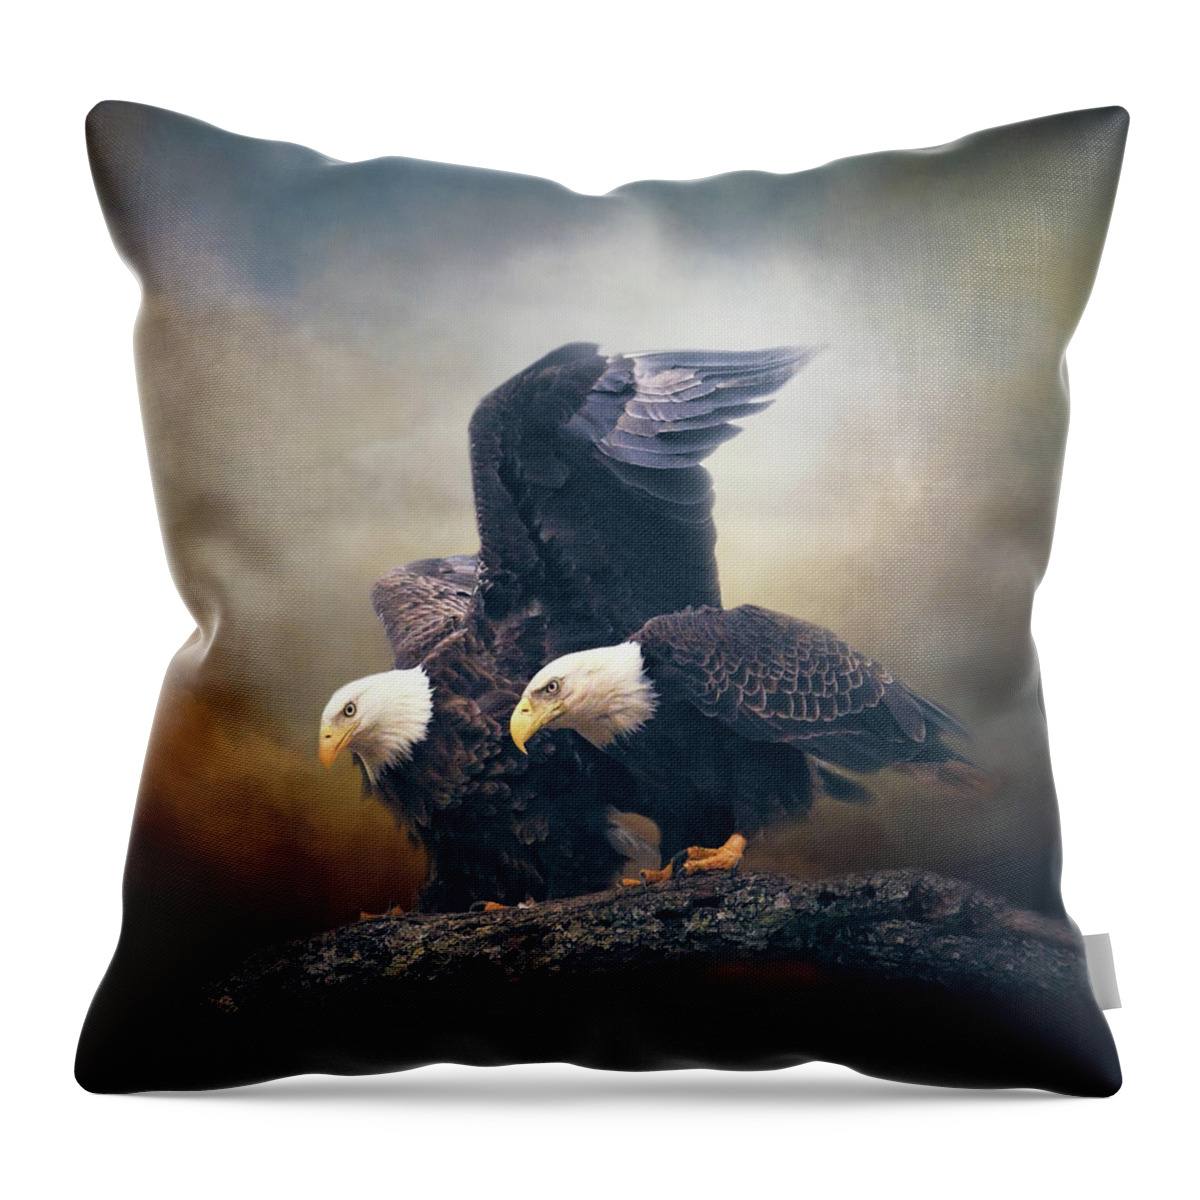 Bald Eagle Throw Pillow featuring the photograph I Will Shelter You by Jai Johnson